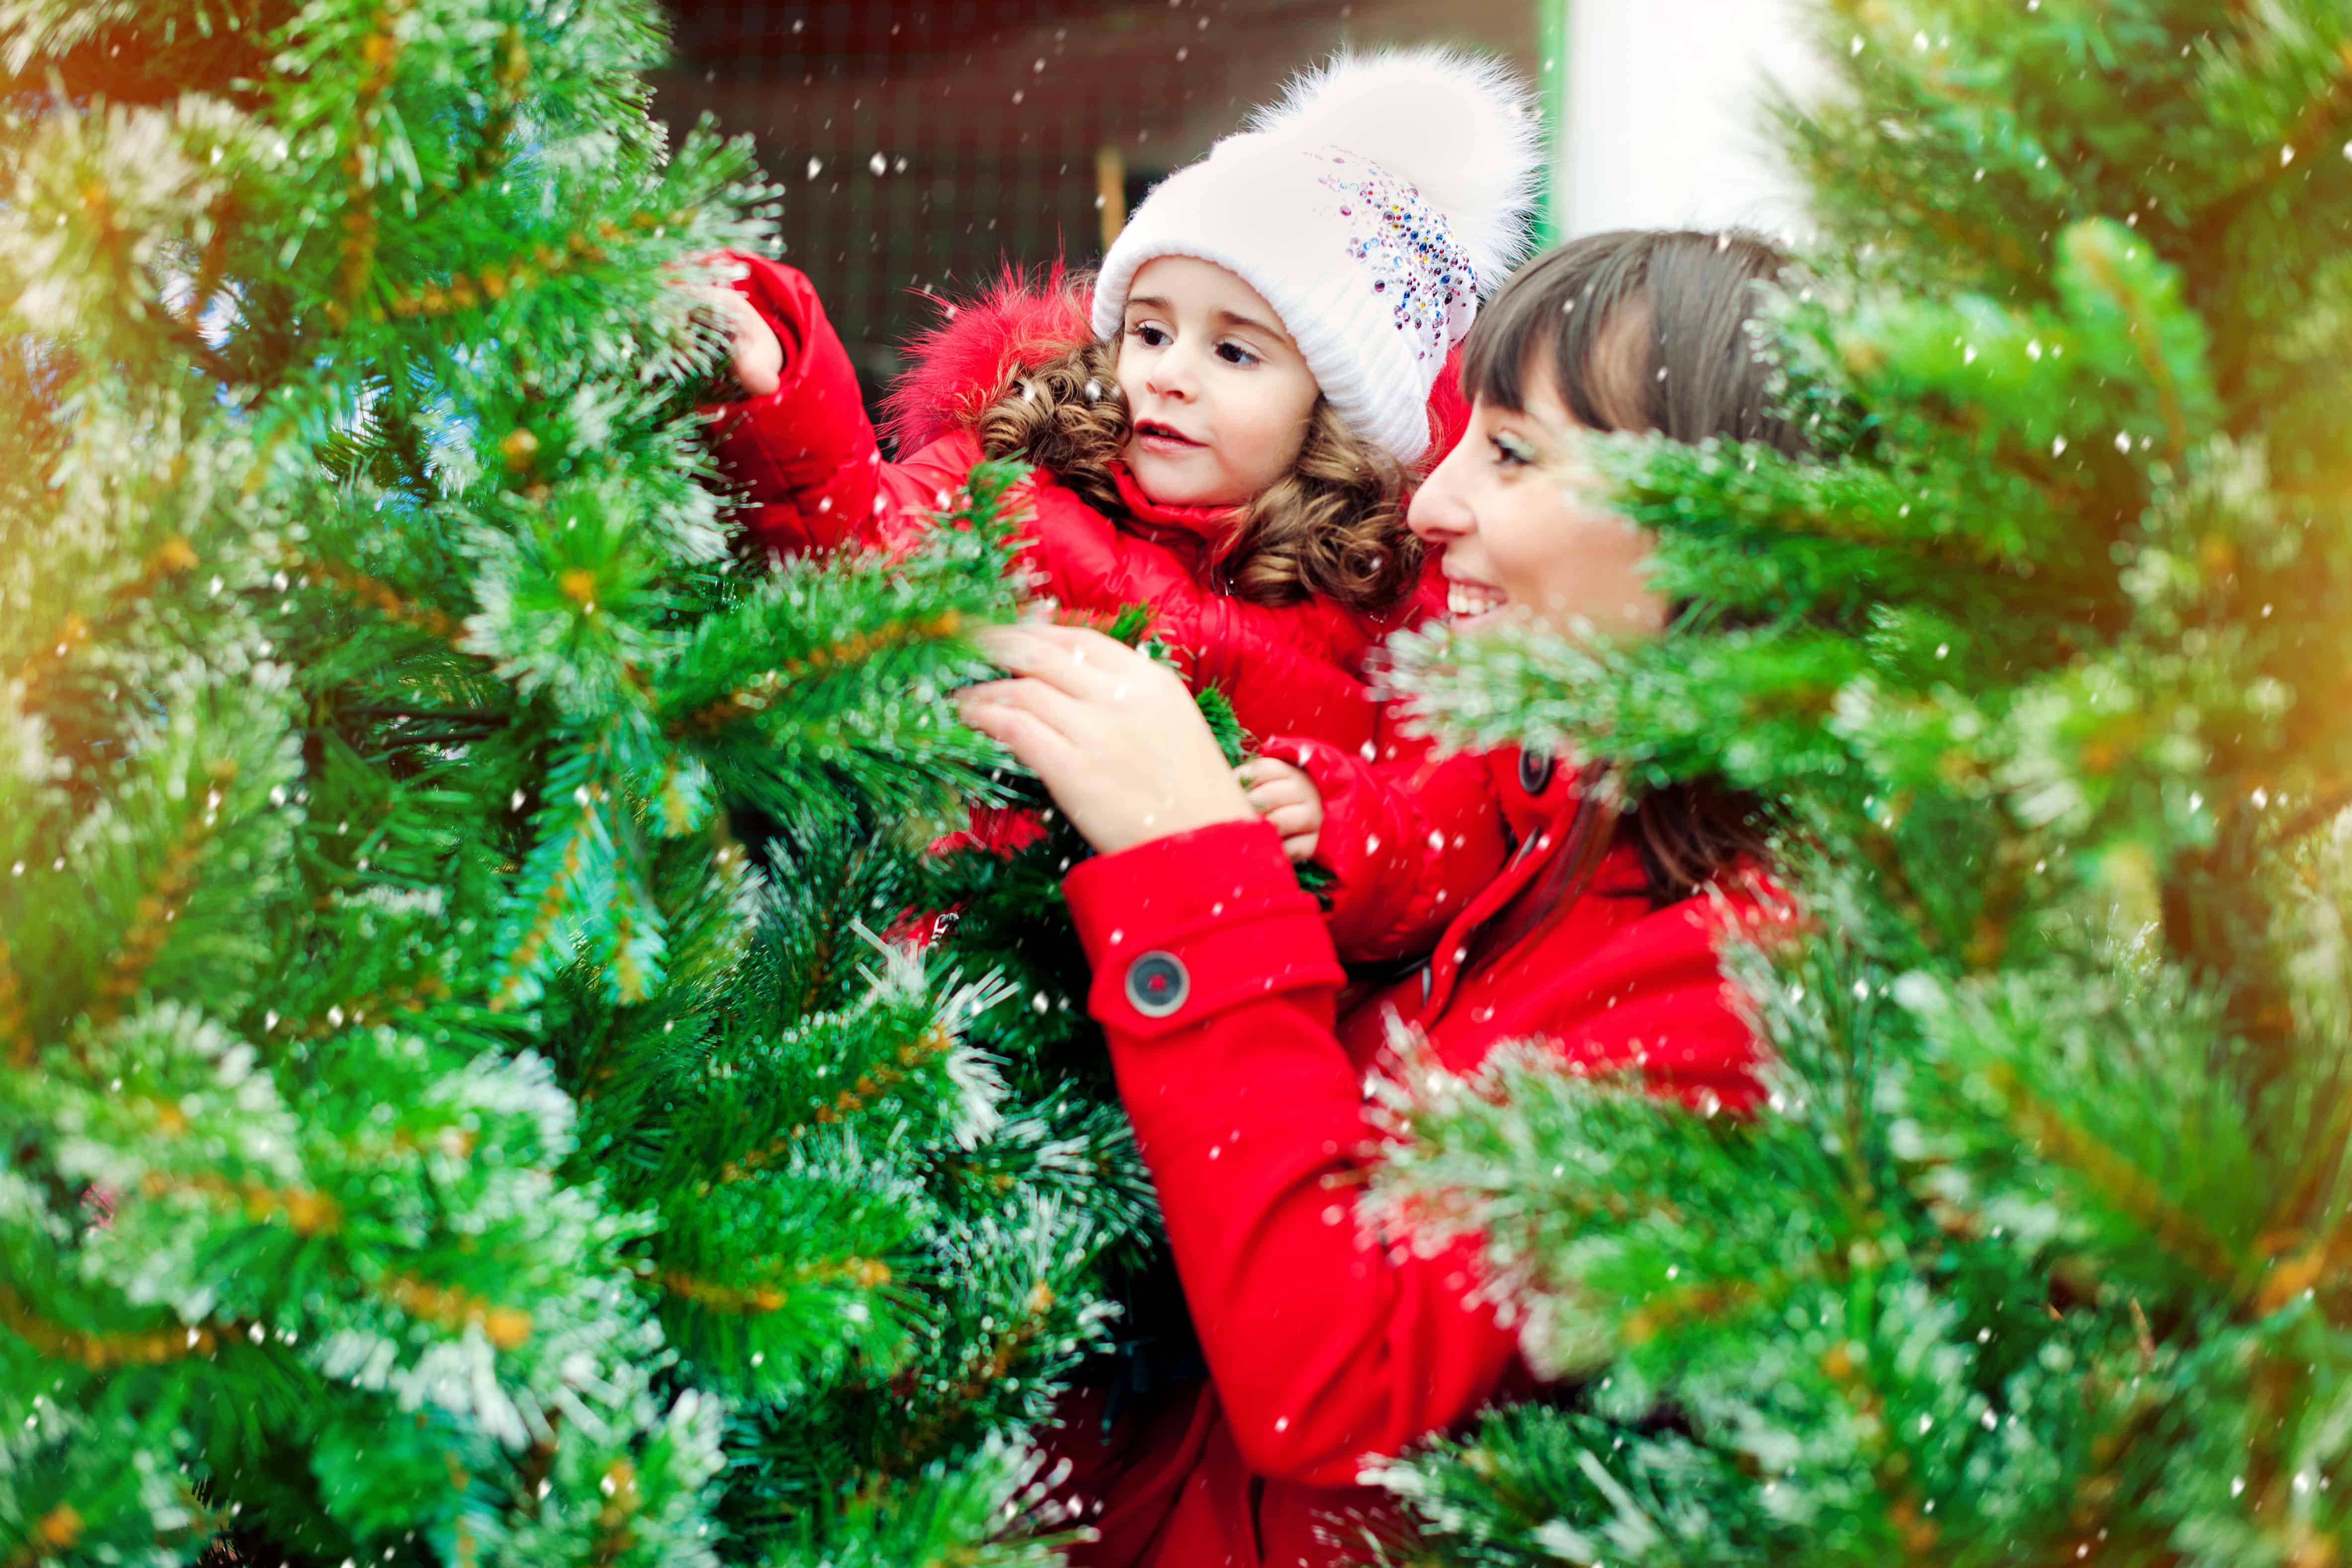 woman and child decorating a pine tree